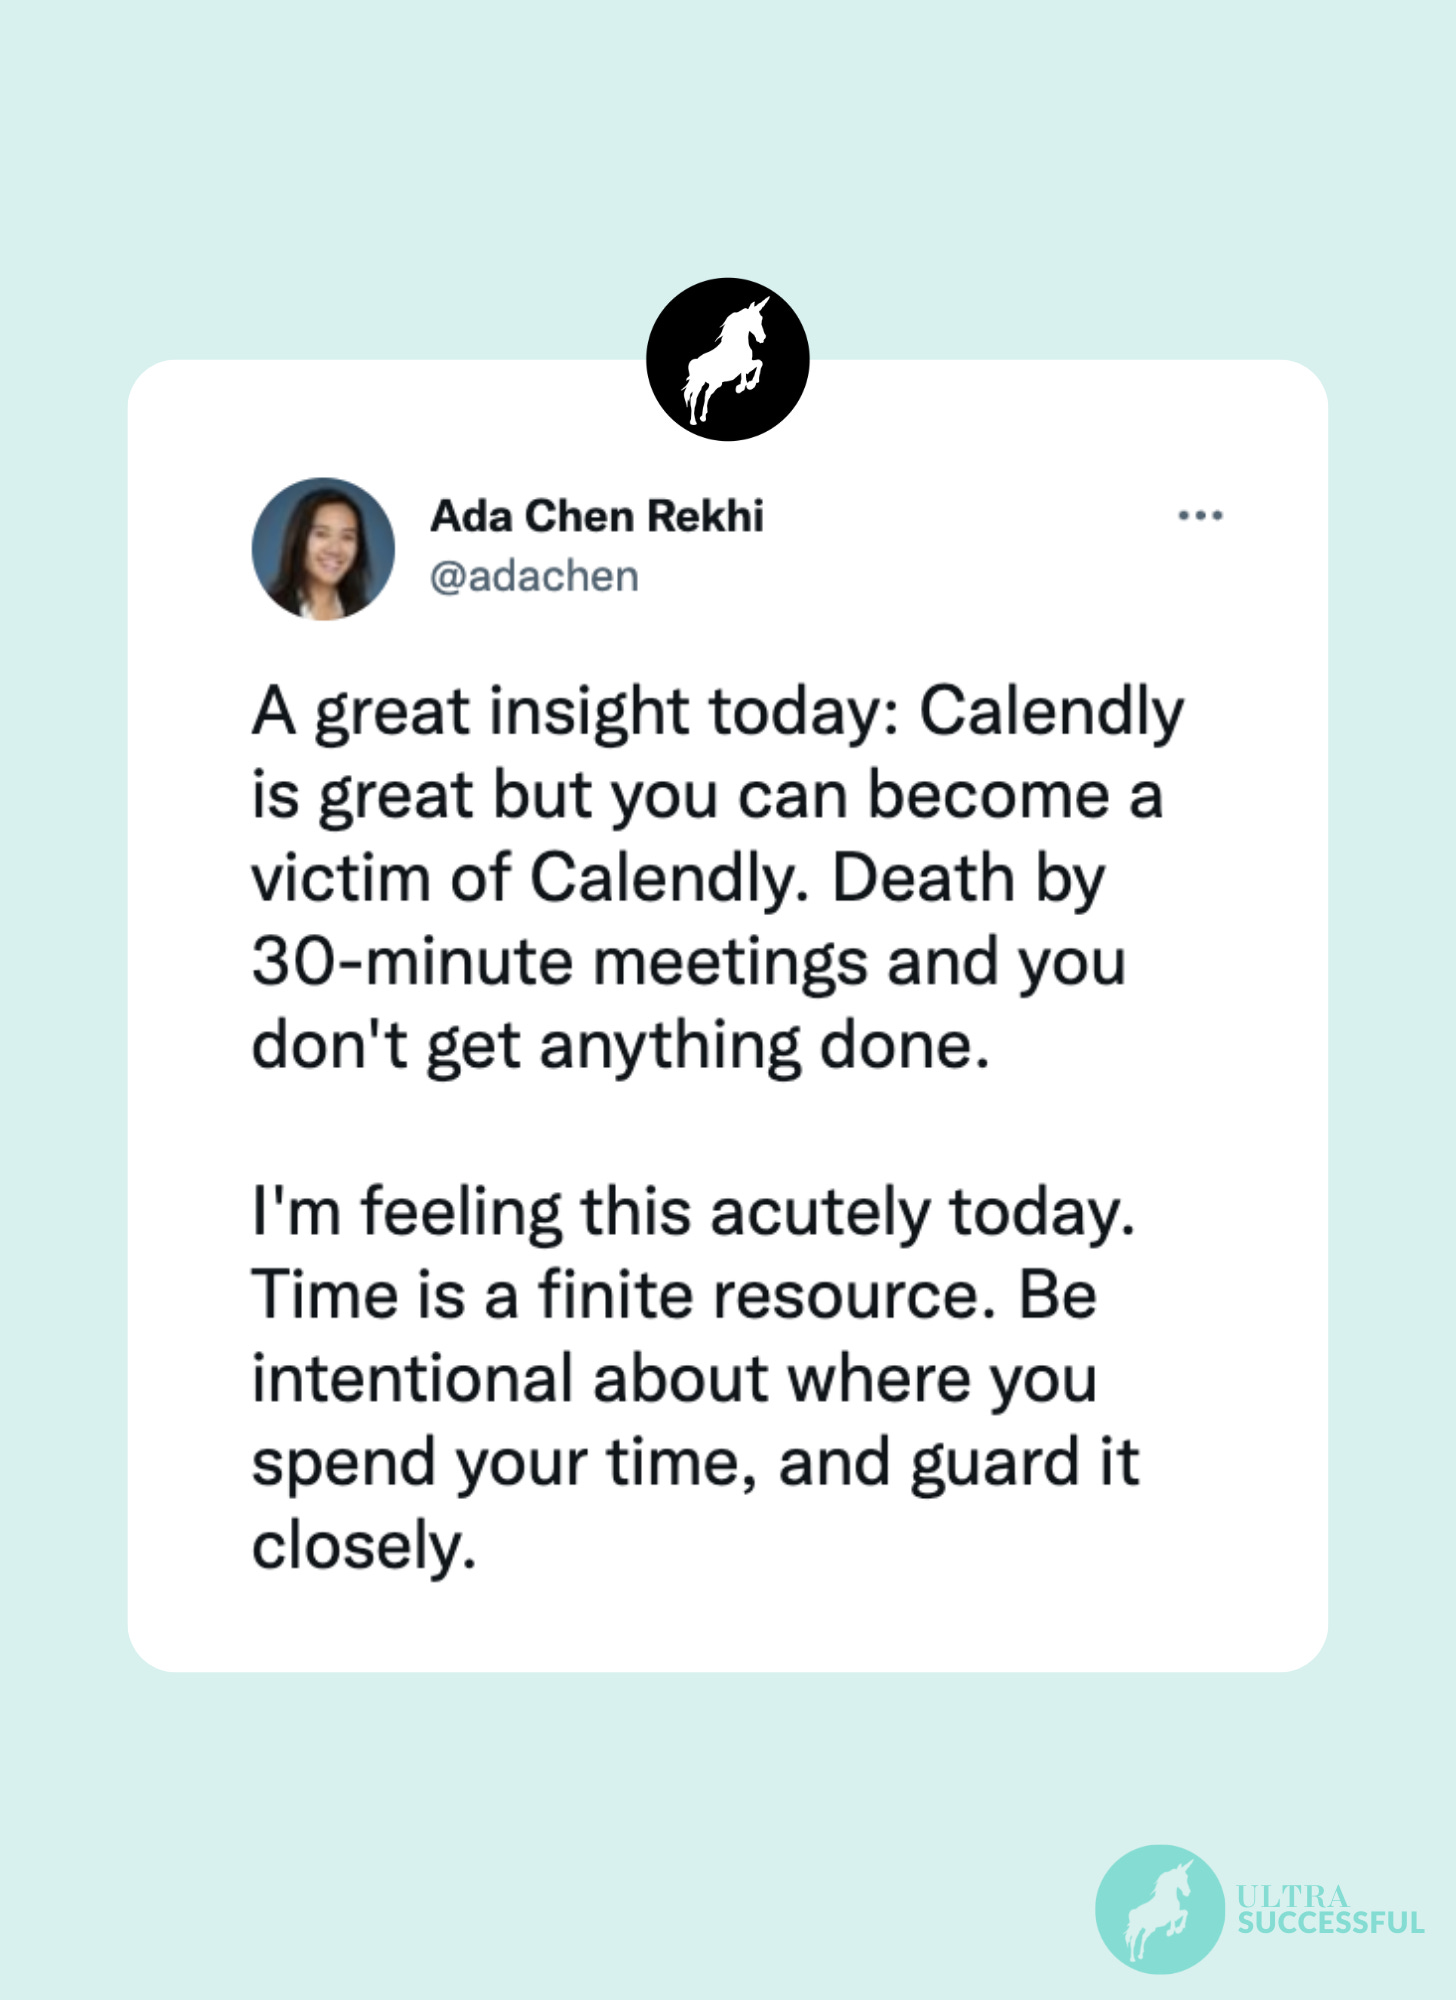 @adachen: A great insight today: Calendly is great but you can become a victim of Calendly. Death by 30-minute meetings and you don't get anything done.  I'm feeling this acutely today. Time is a finite resource. Be intentional about where you spend your time, and guard it closely.